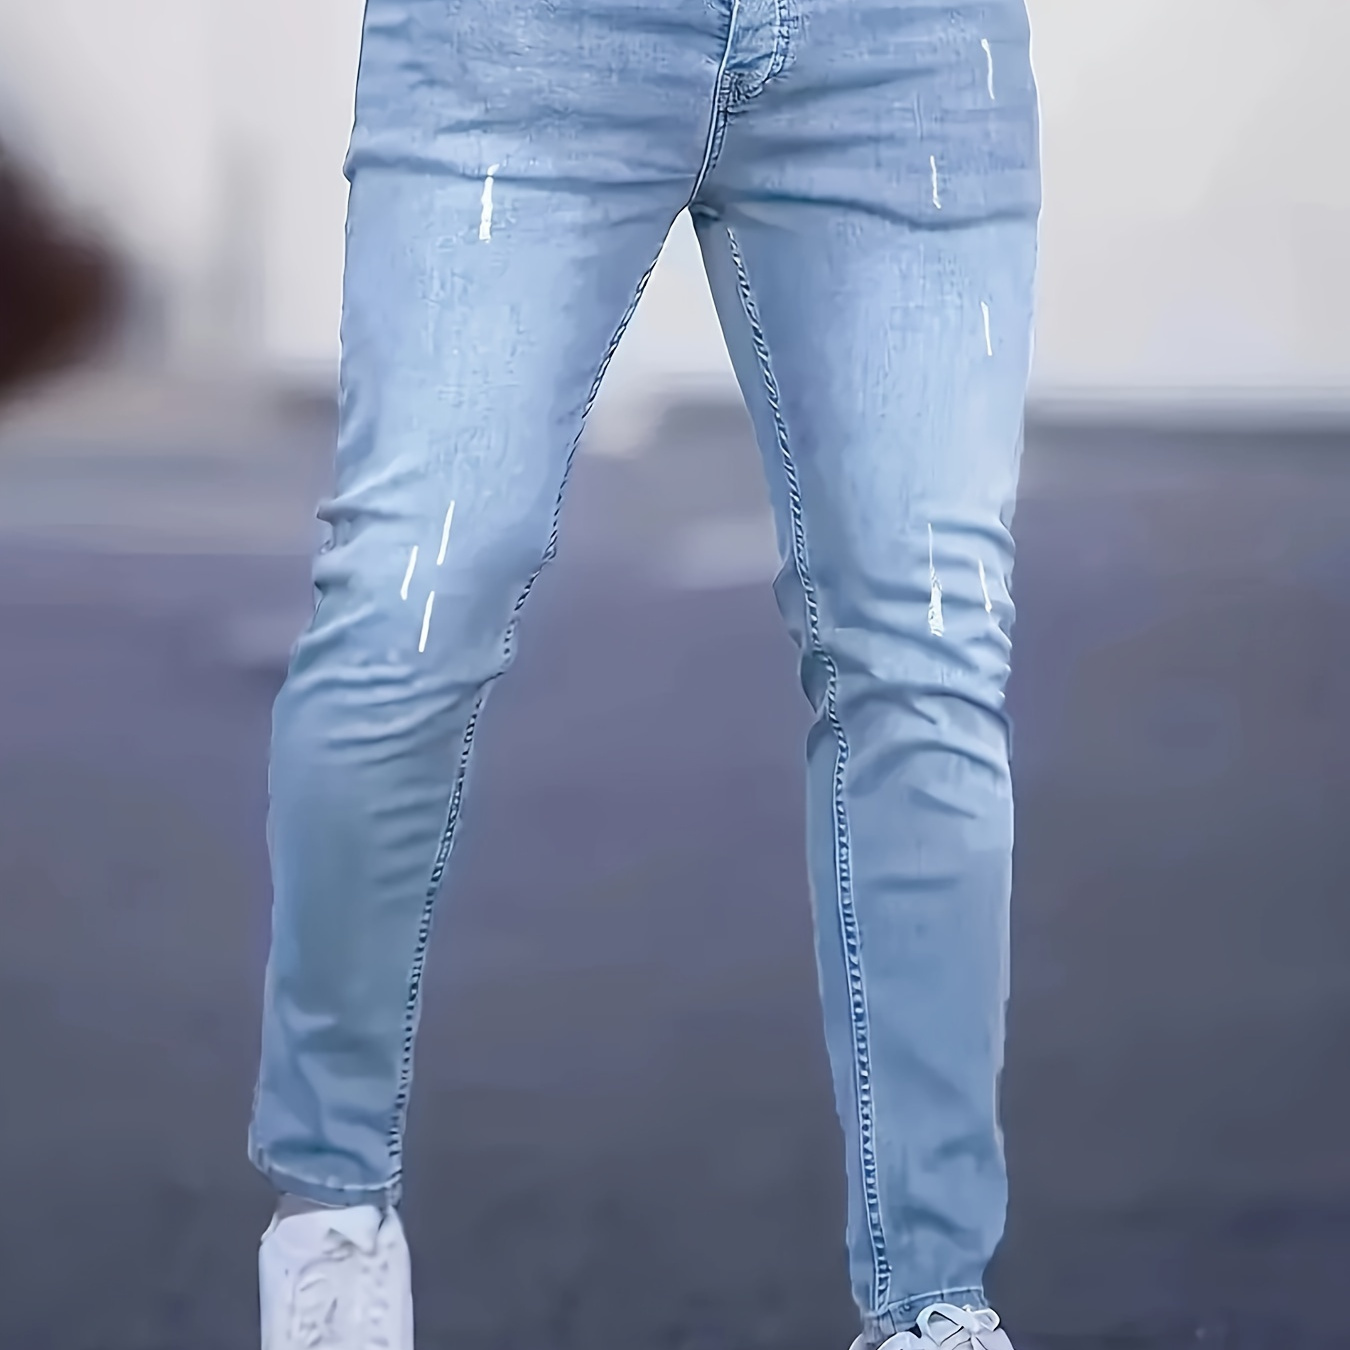 

Men's Casual Light Ankle-length Denim Jeans, Slim Fit Slightly Stretch Jeans, Fashion Street Wear For Everyday Outfits